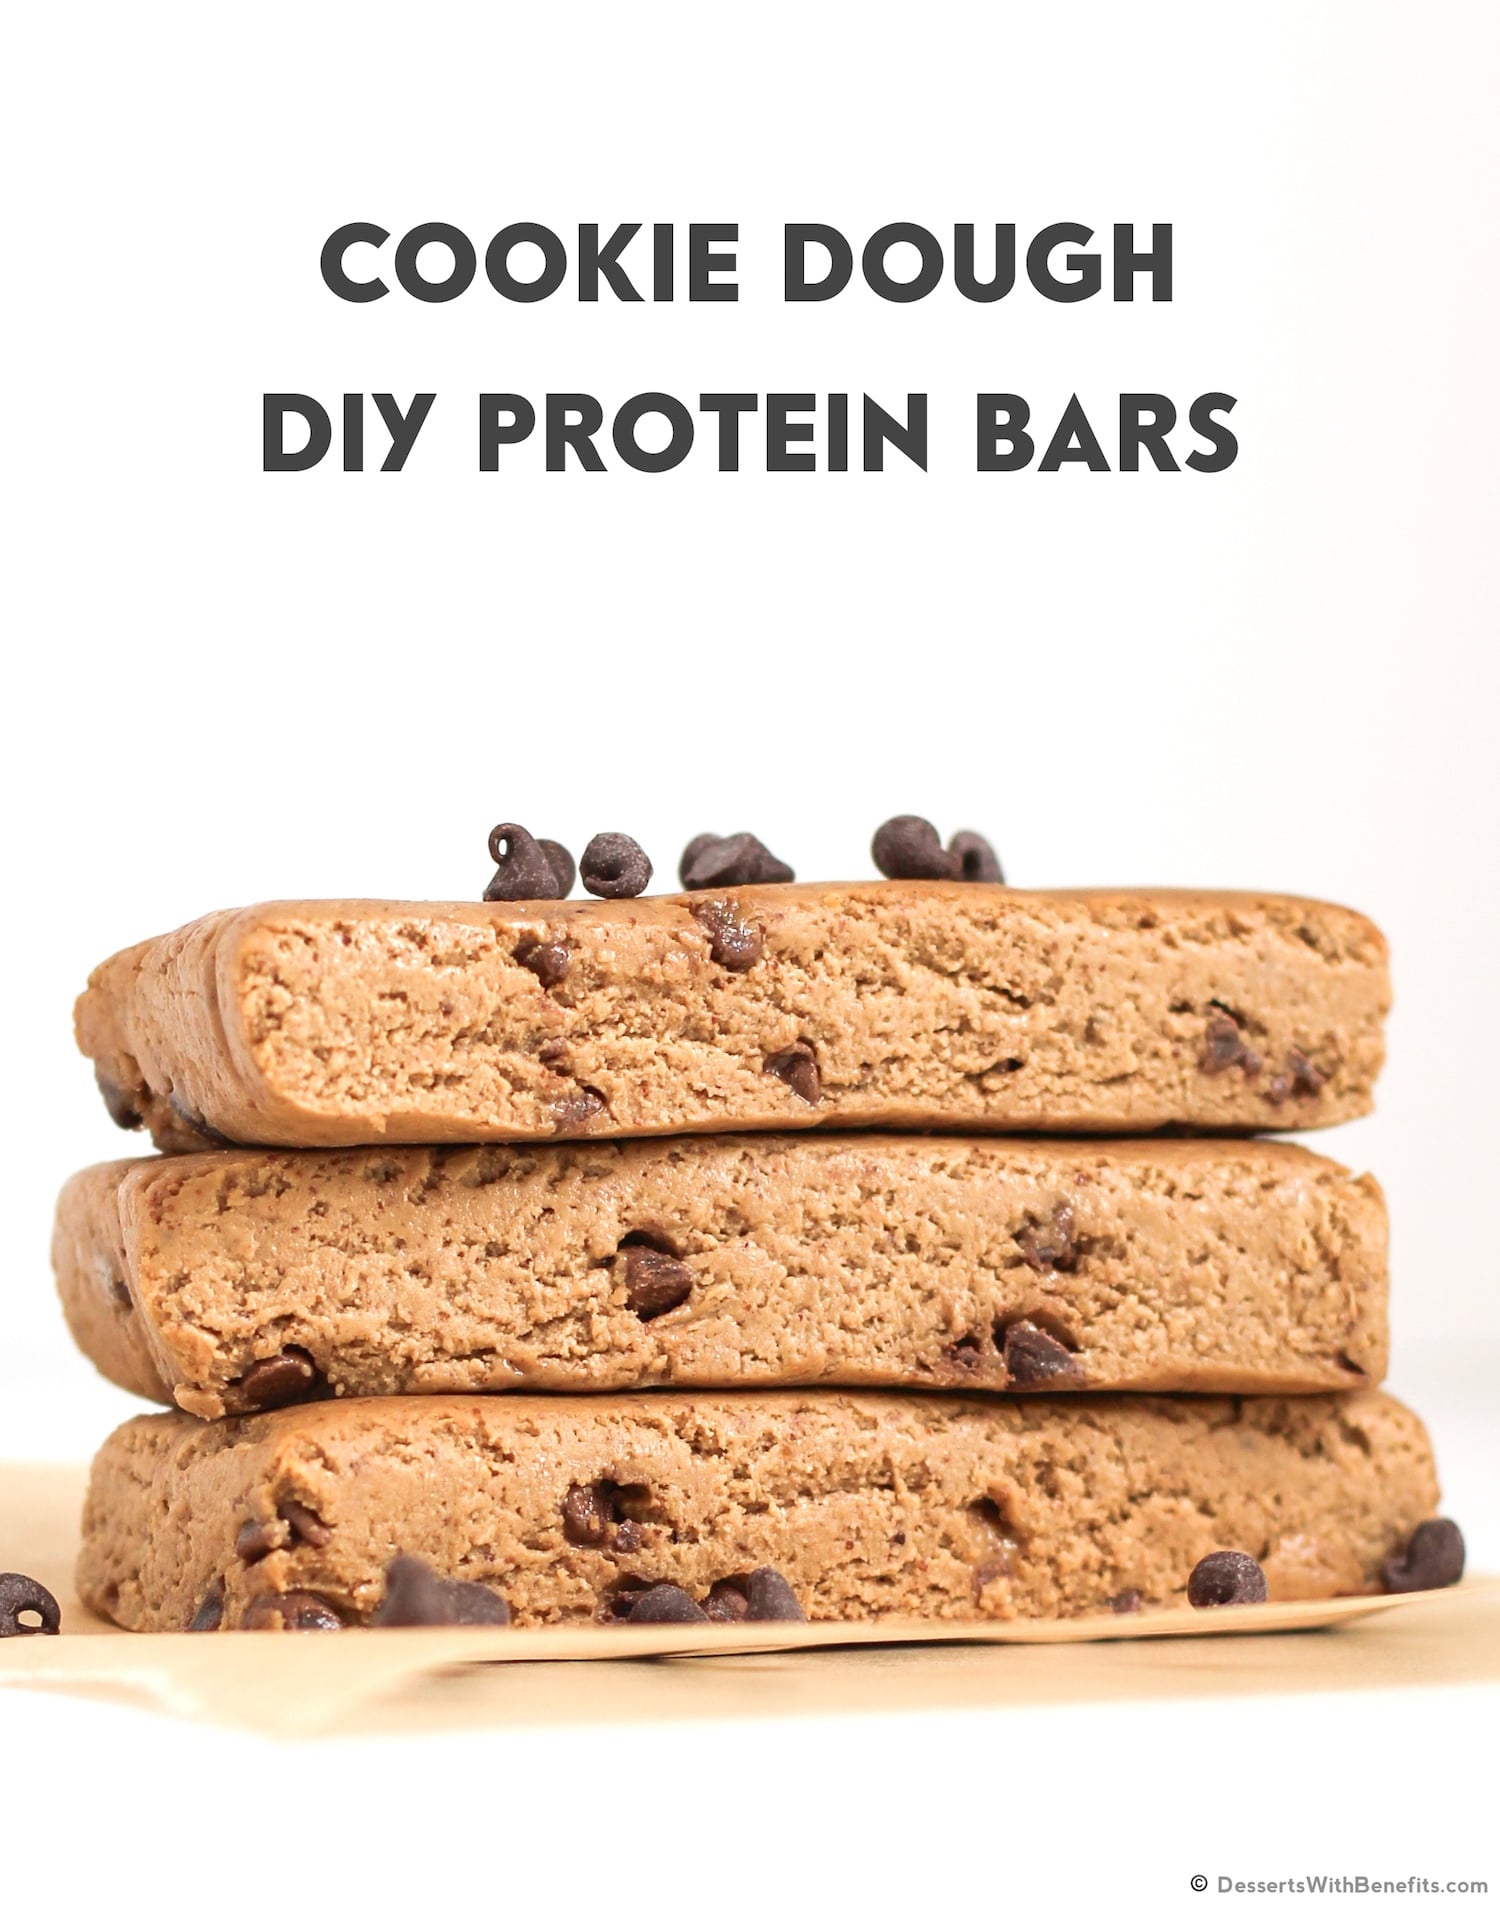 These healthy, no-bake Chocolate Chip Cookie Dough DIY Protein Bars are sweet, buttery, and delicious. Just like cookie dough out of the tub, except these are sugar free, high protein, high fiber, gluten free, dairy free, and vegan. Made with nut butter, chocolate chips, oats, and vegan protein powder. You'll never go back to store-bought bars again!